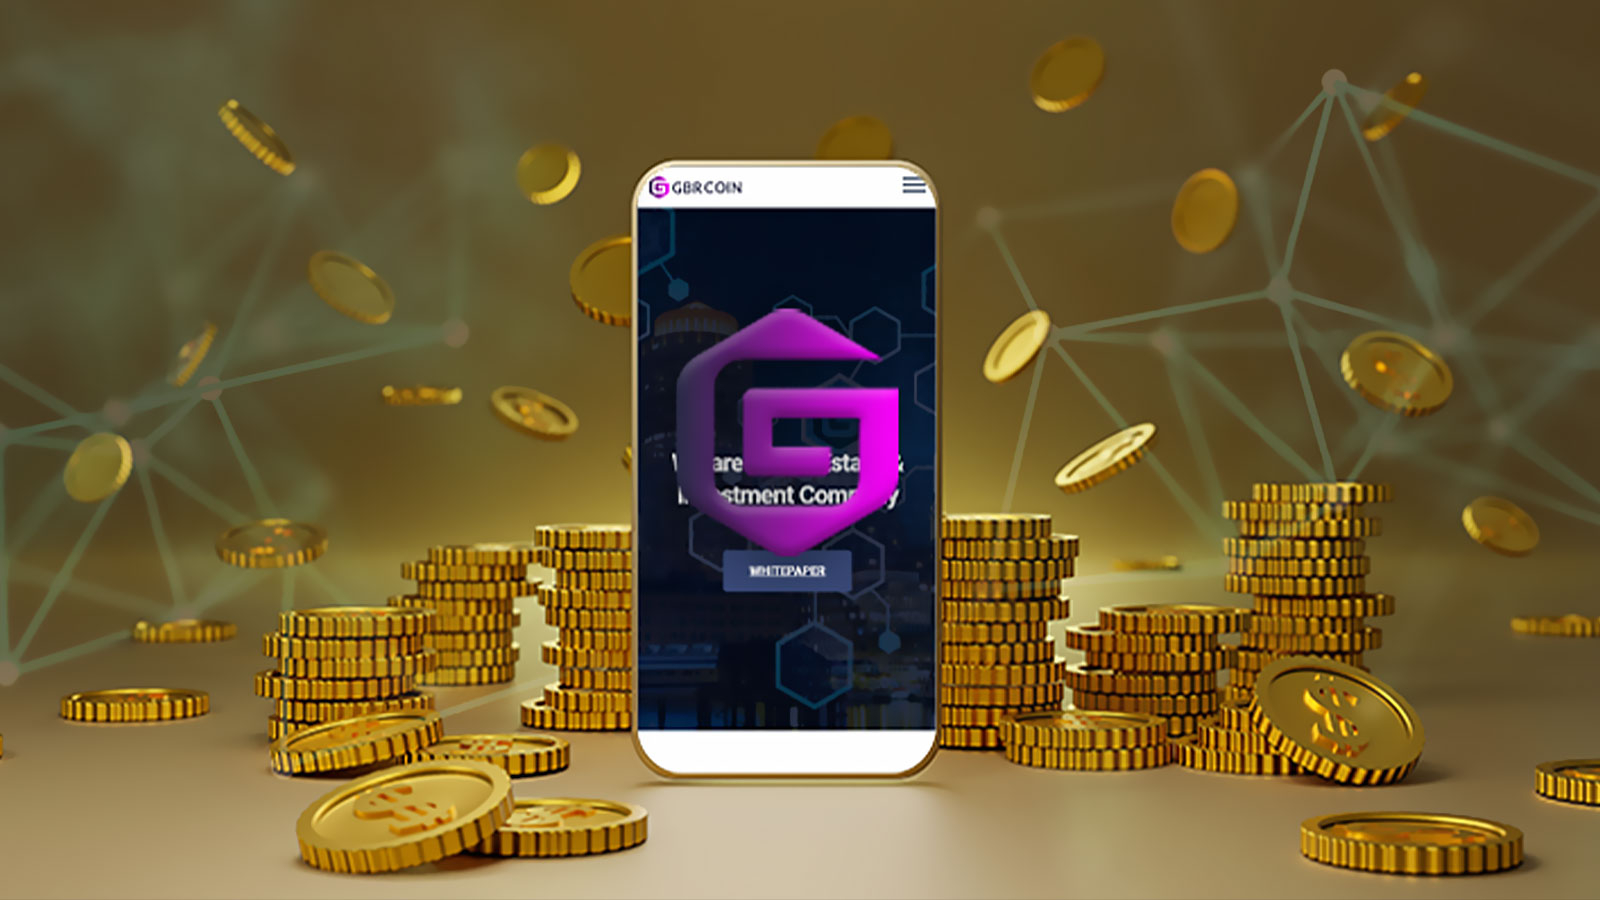 GBR COIN (GBR) To Launch Much-awaited ICO Following Intensive Development